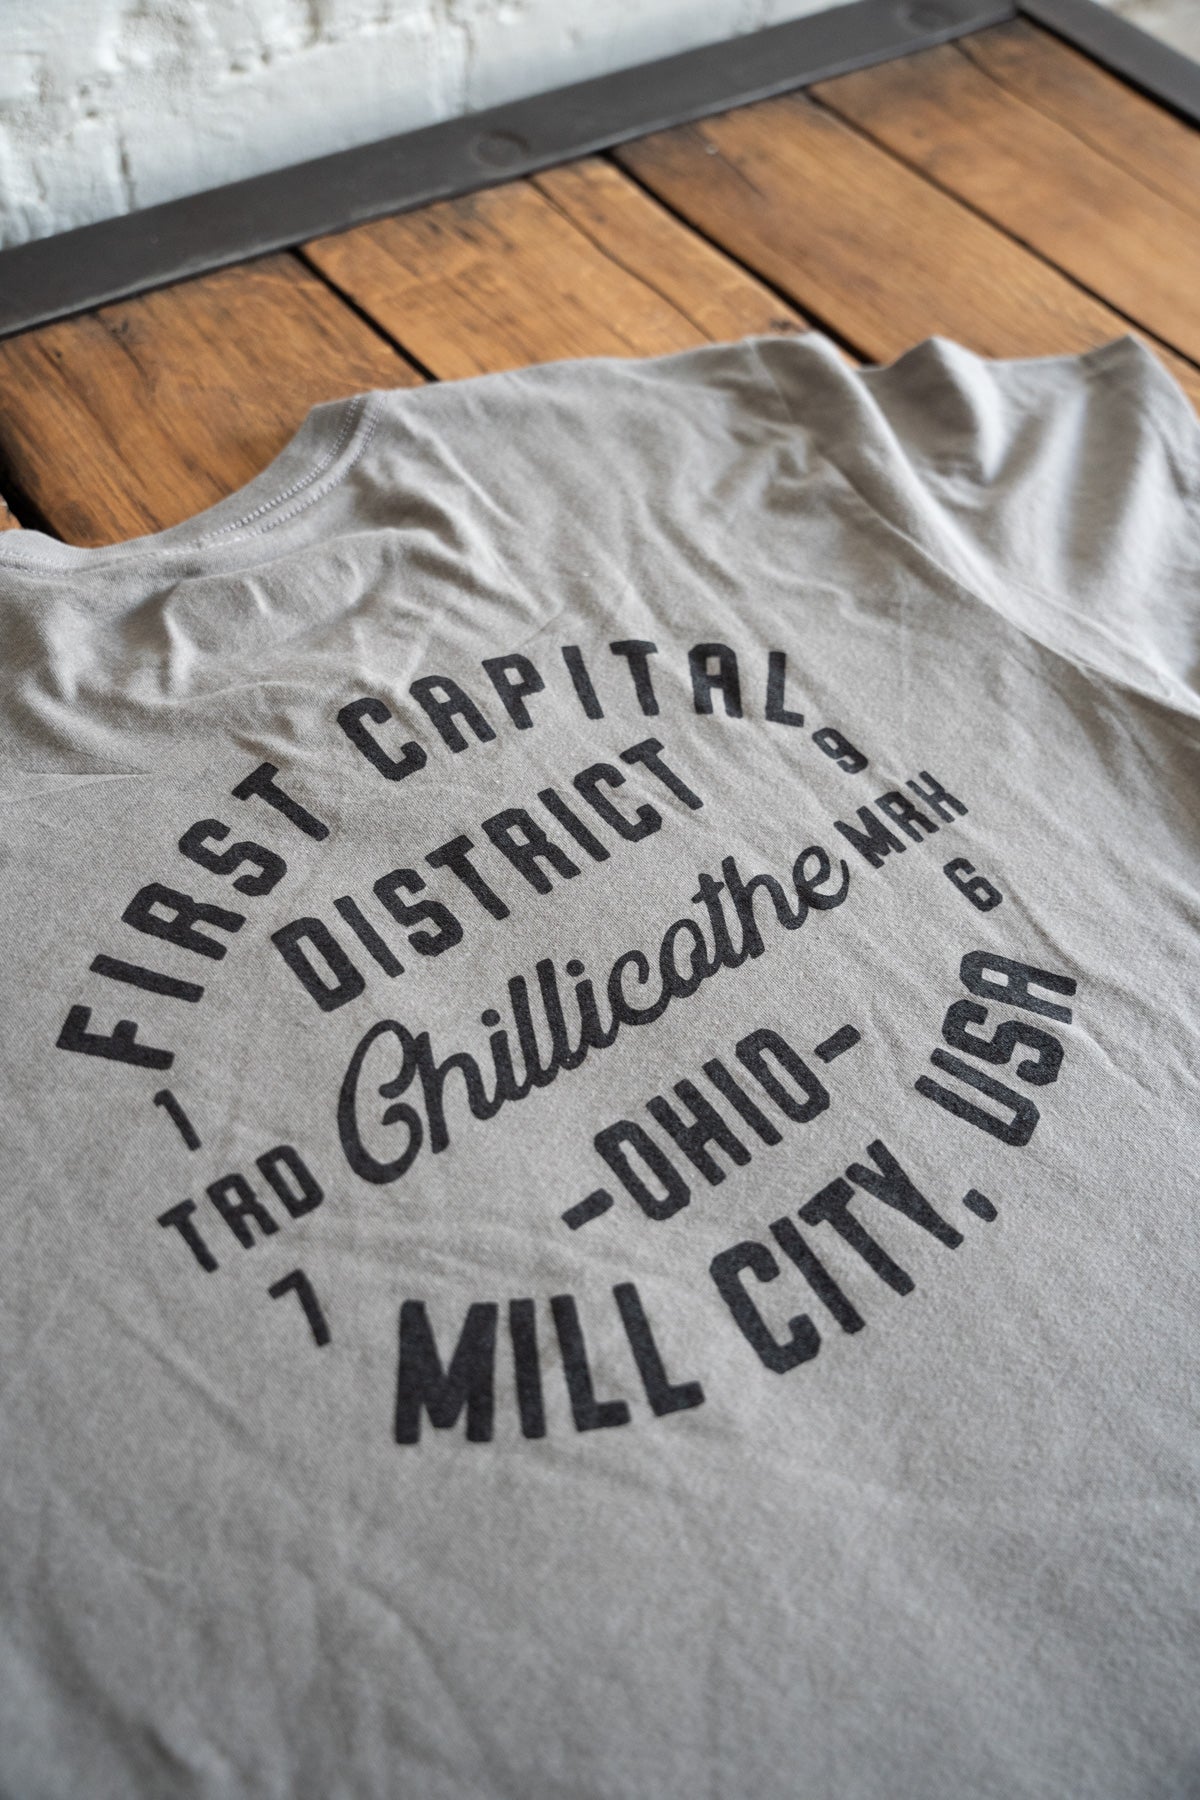 First Capital District Tee